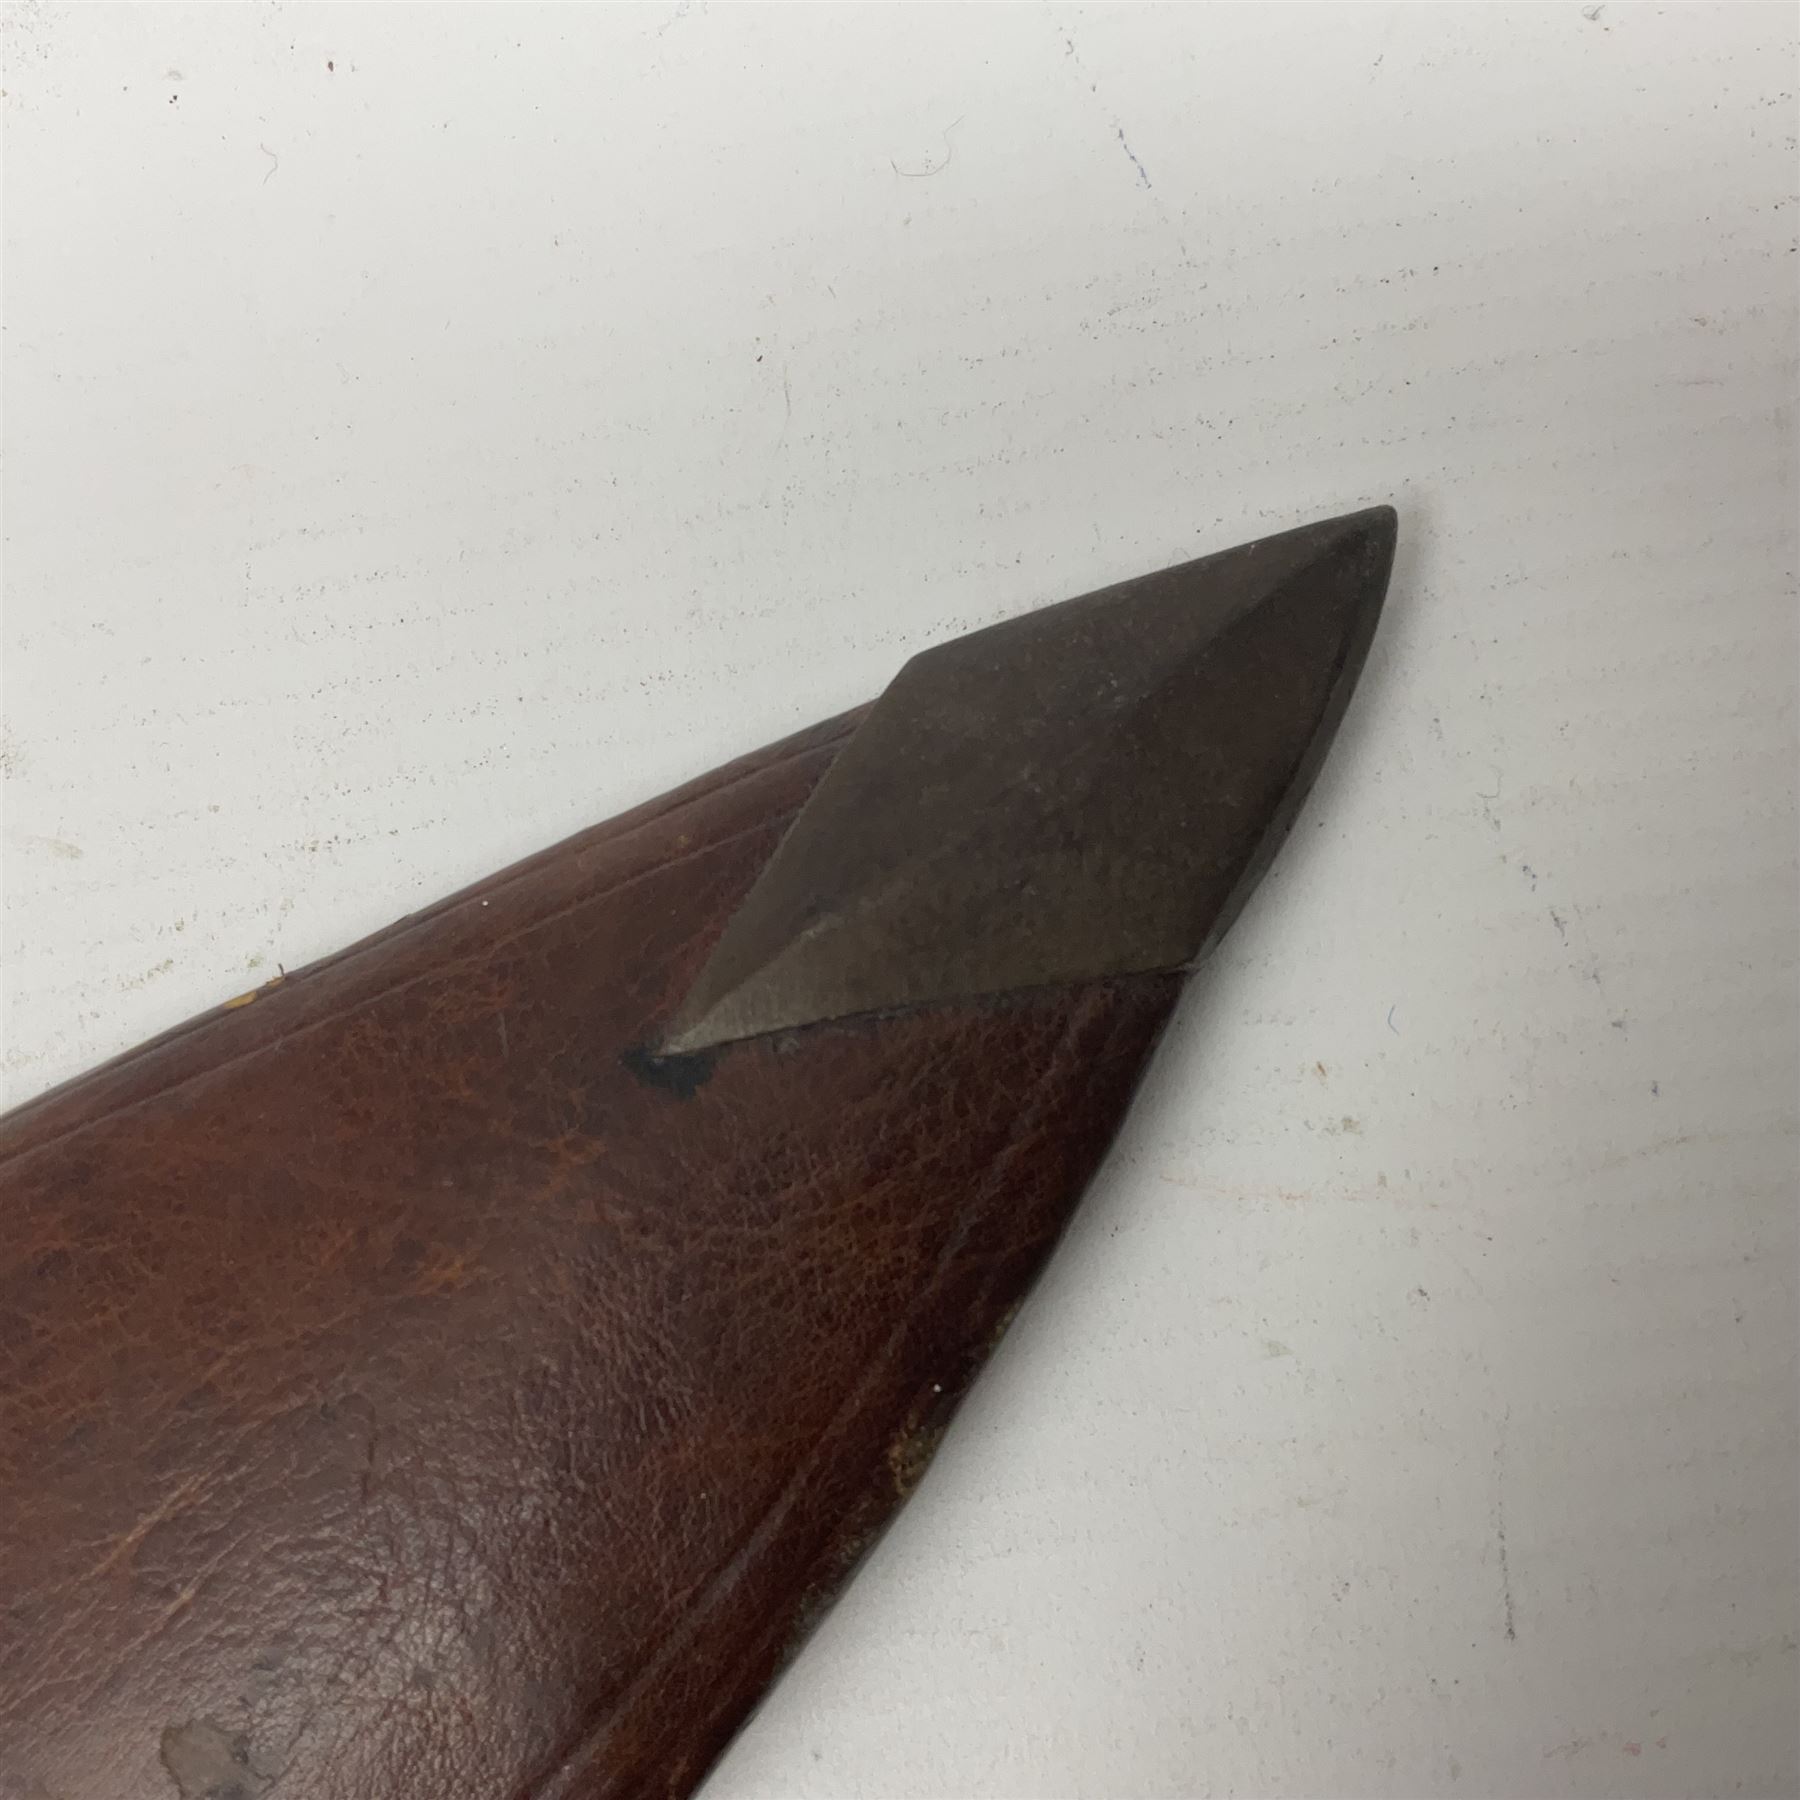 Kukri with curving blade - Image 19 of 19